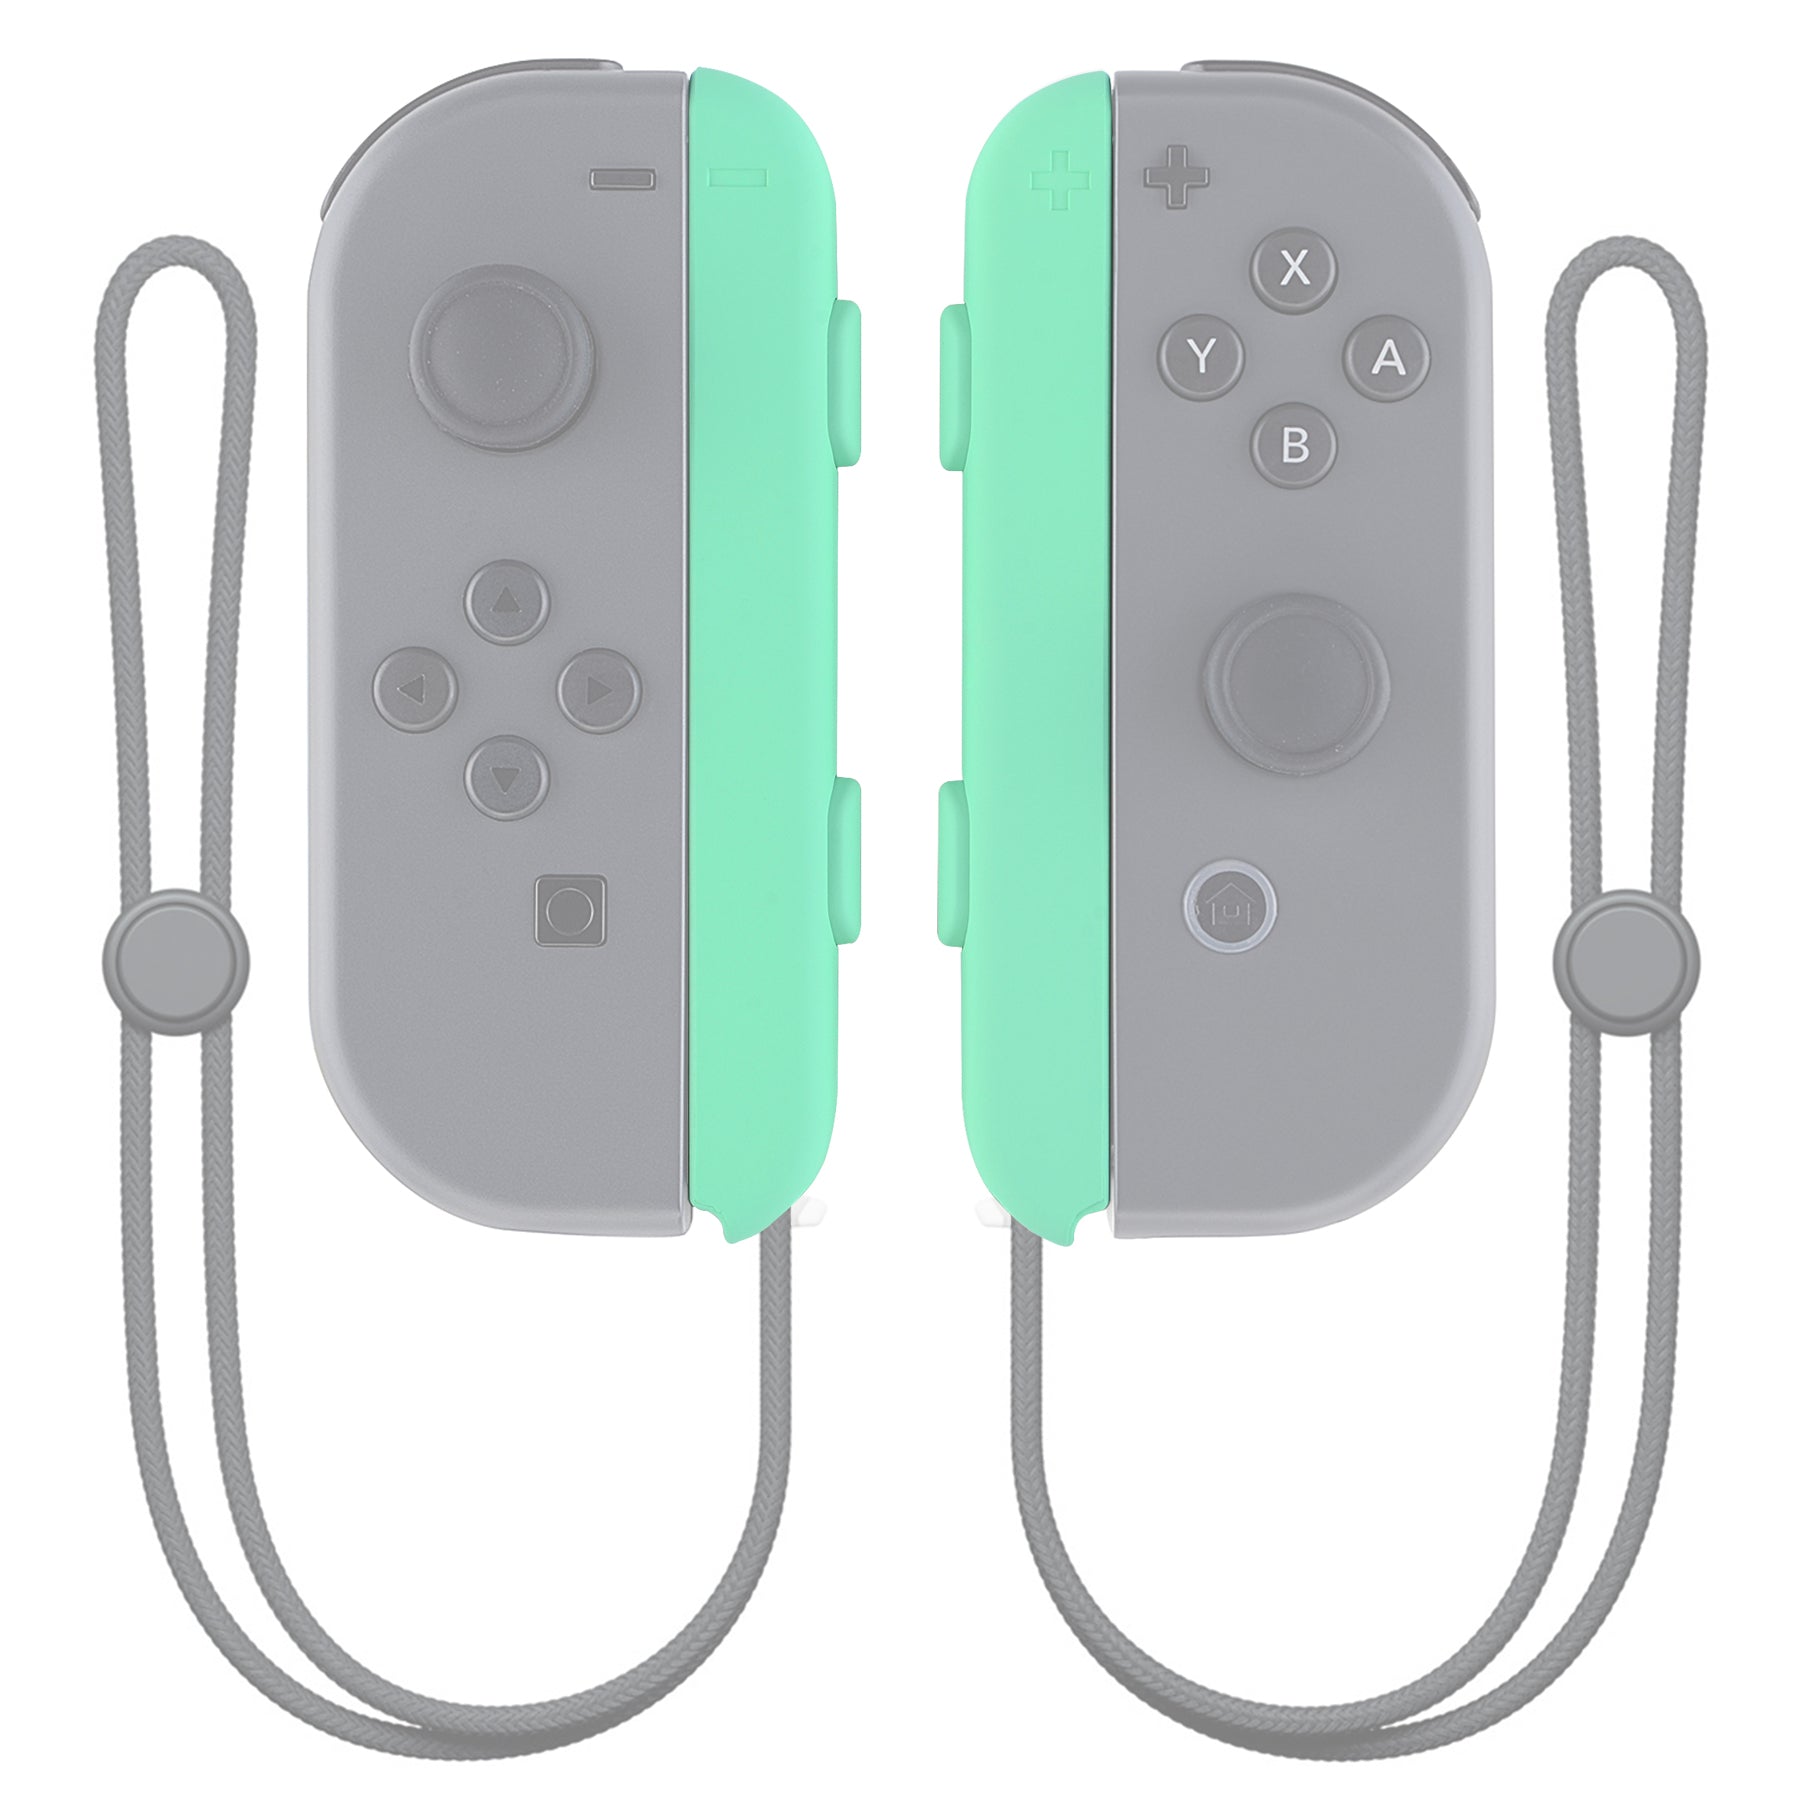 Custom White and Pastel Green Nintendo Switch Joy-con Joycon Controllers  With Matching Buttons 